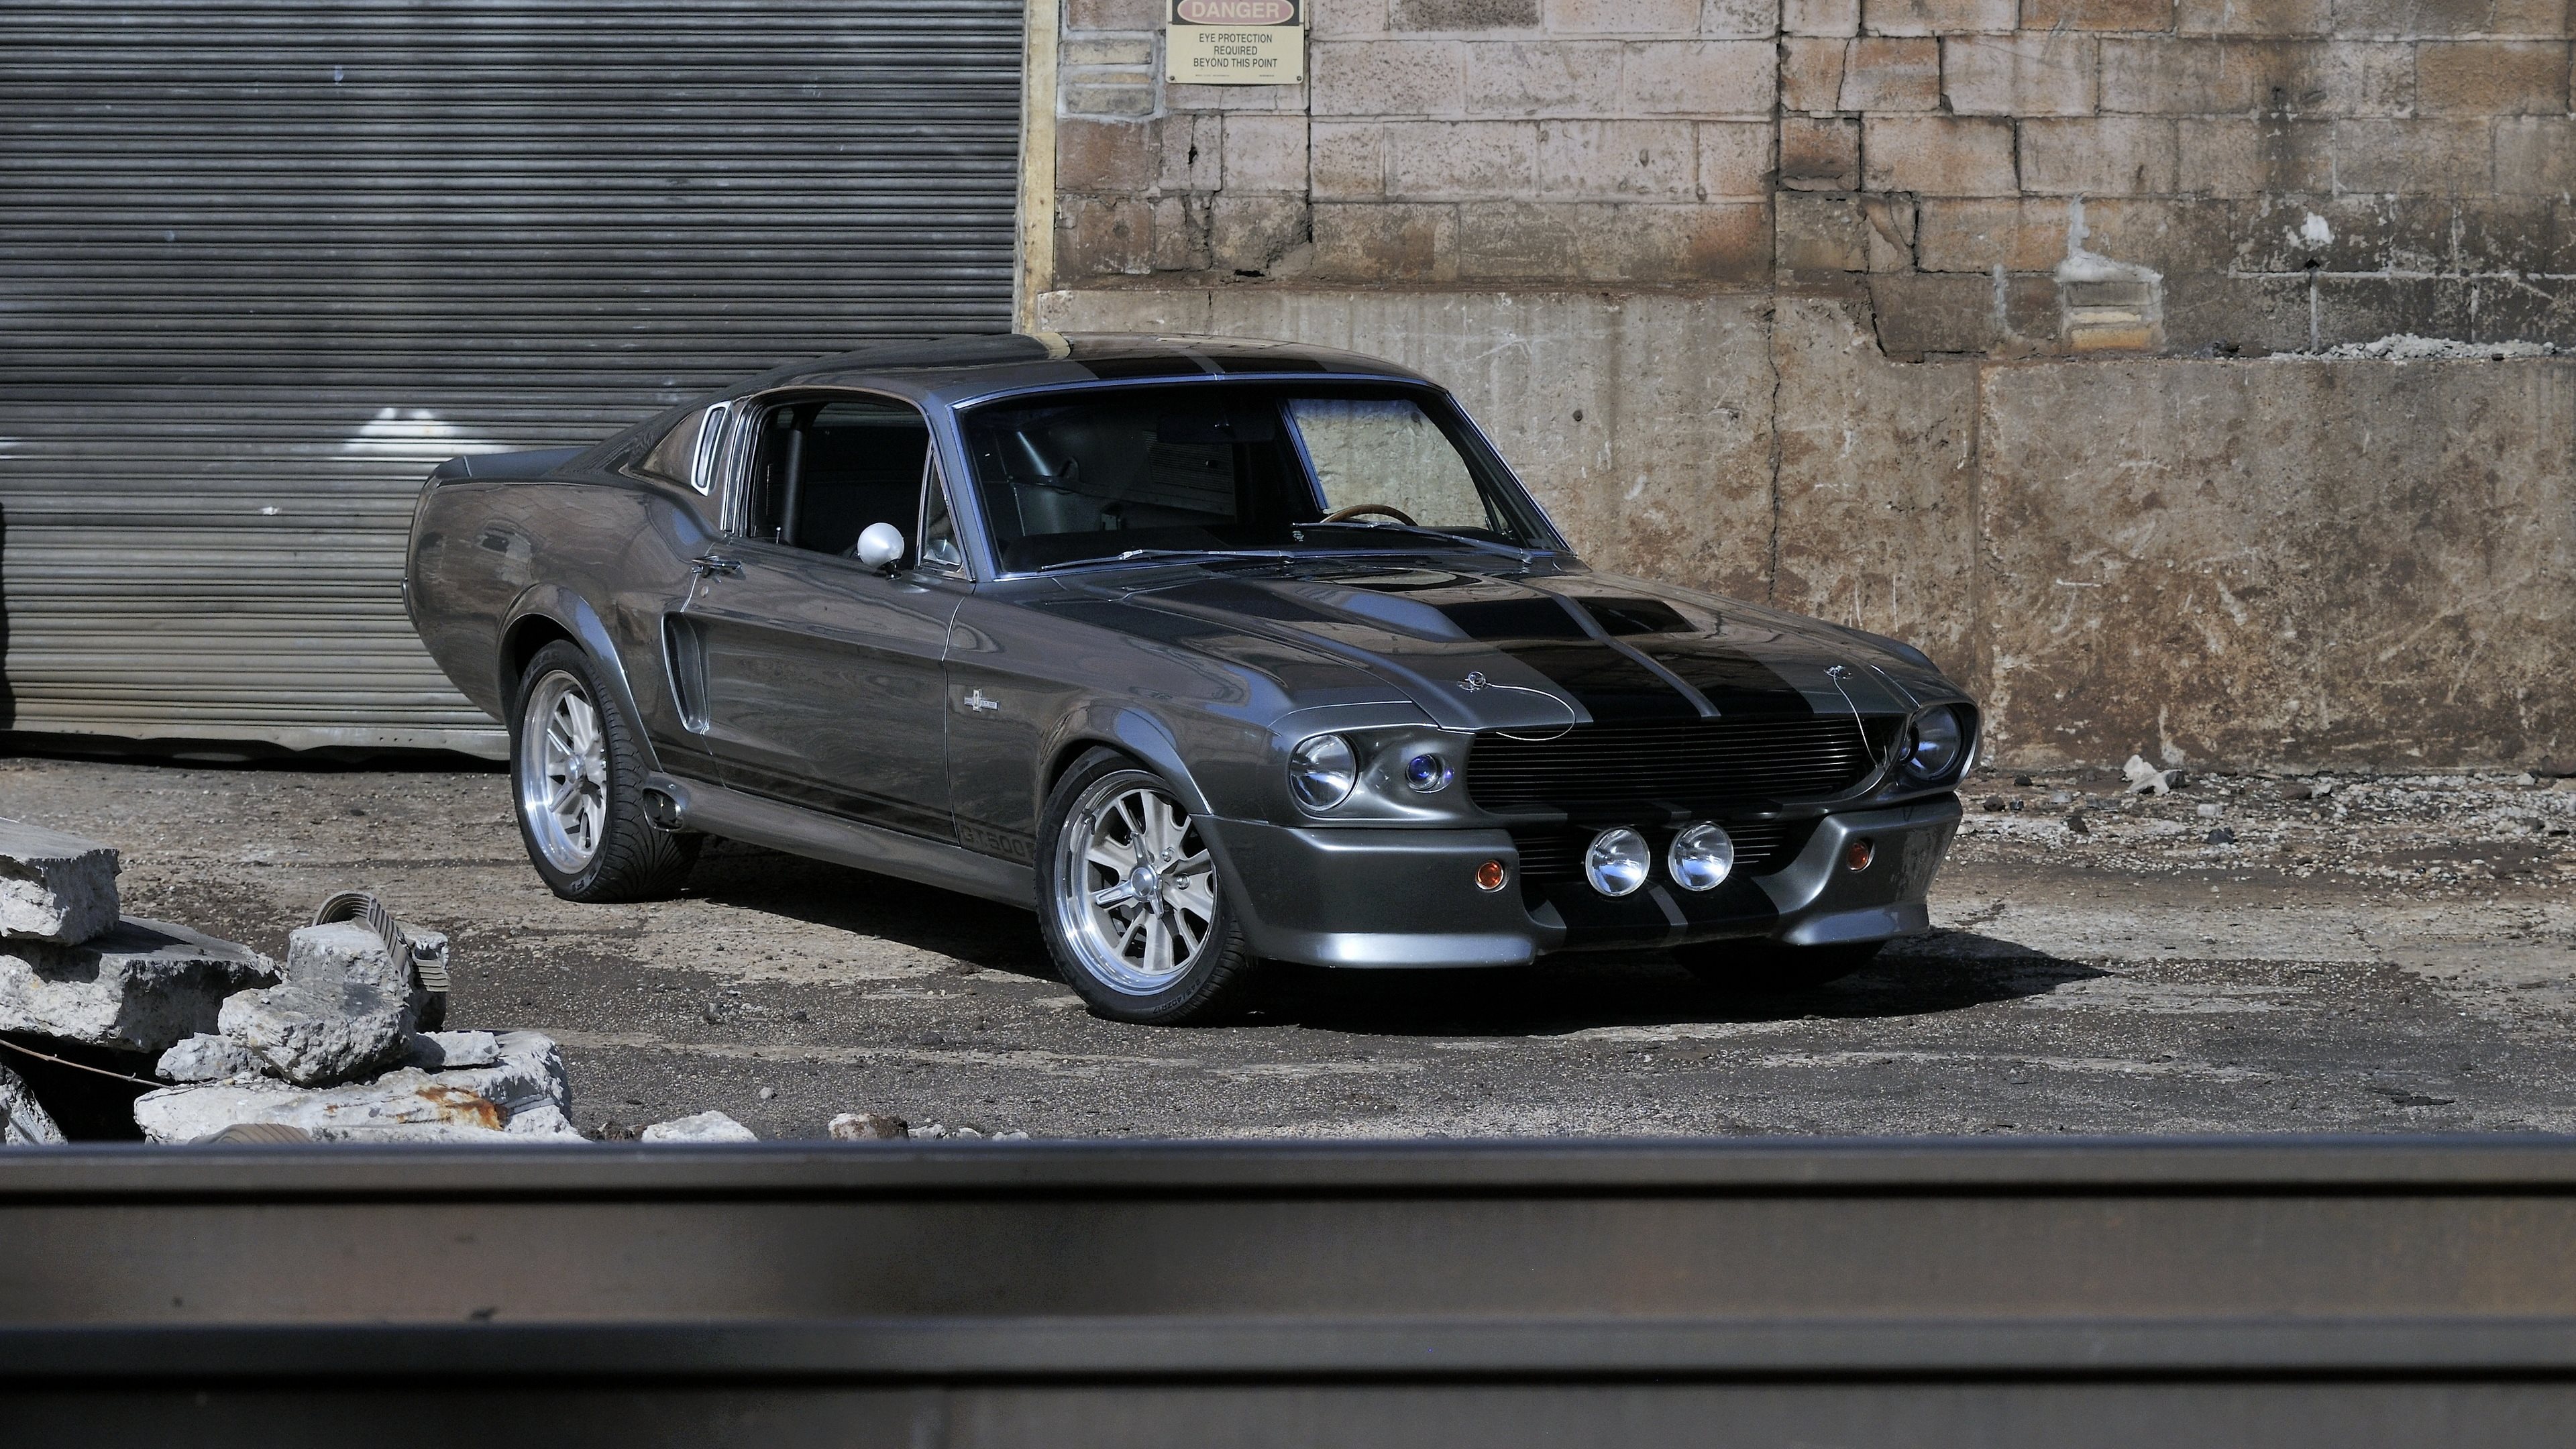 Ford Mustang Gt500 Eleanor Retro Cars 1969 4k Iphone - 1969 Ford Mustang Gt500 Eleanor , HD Wallpaper & Backgrounds